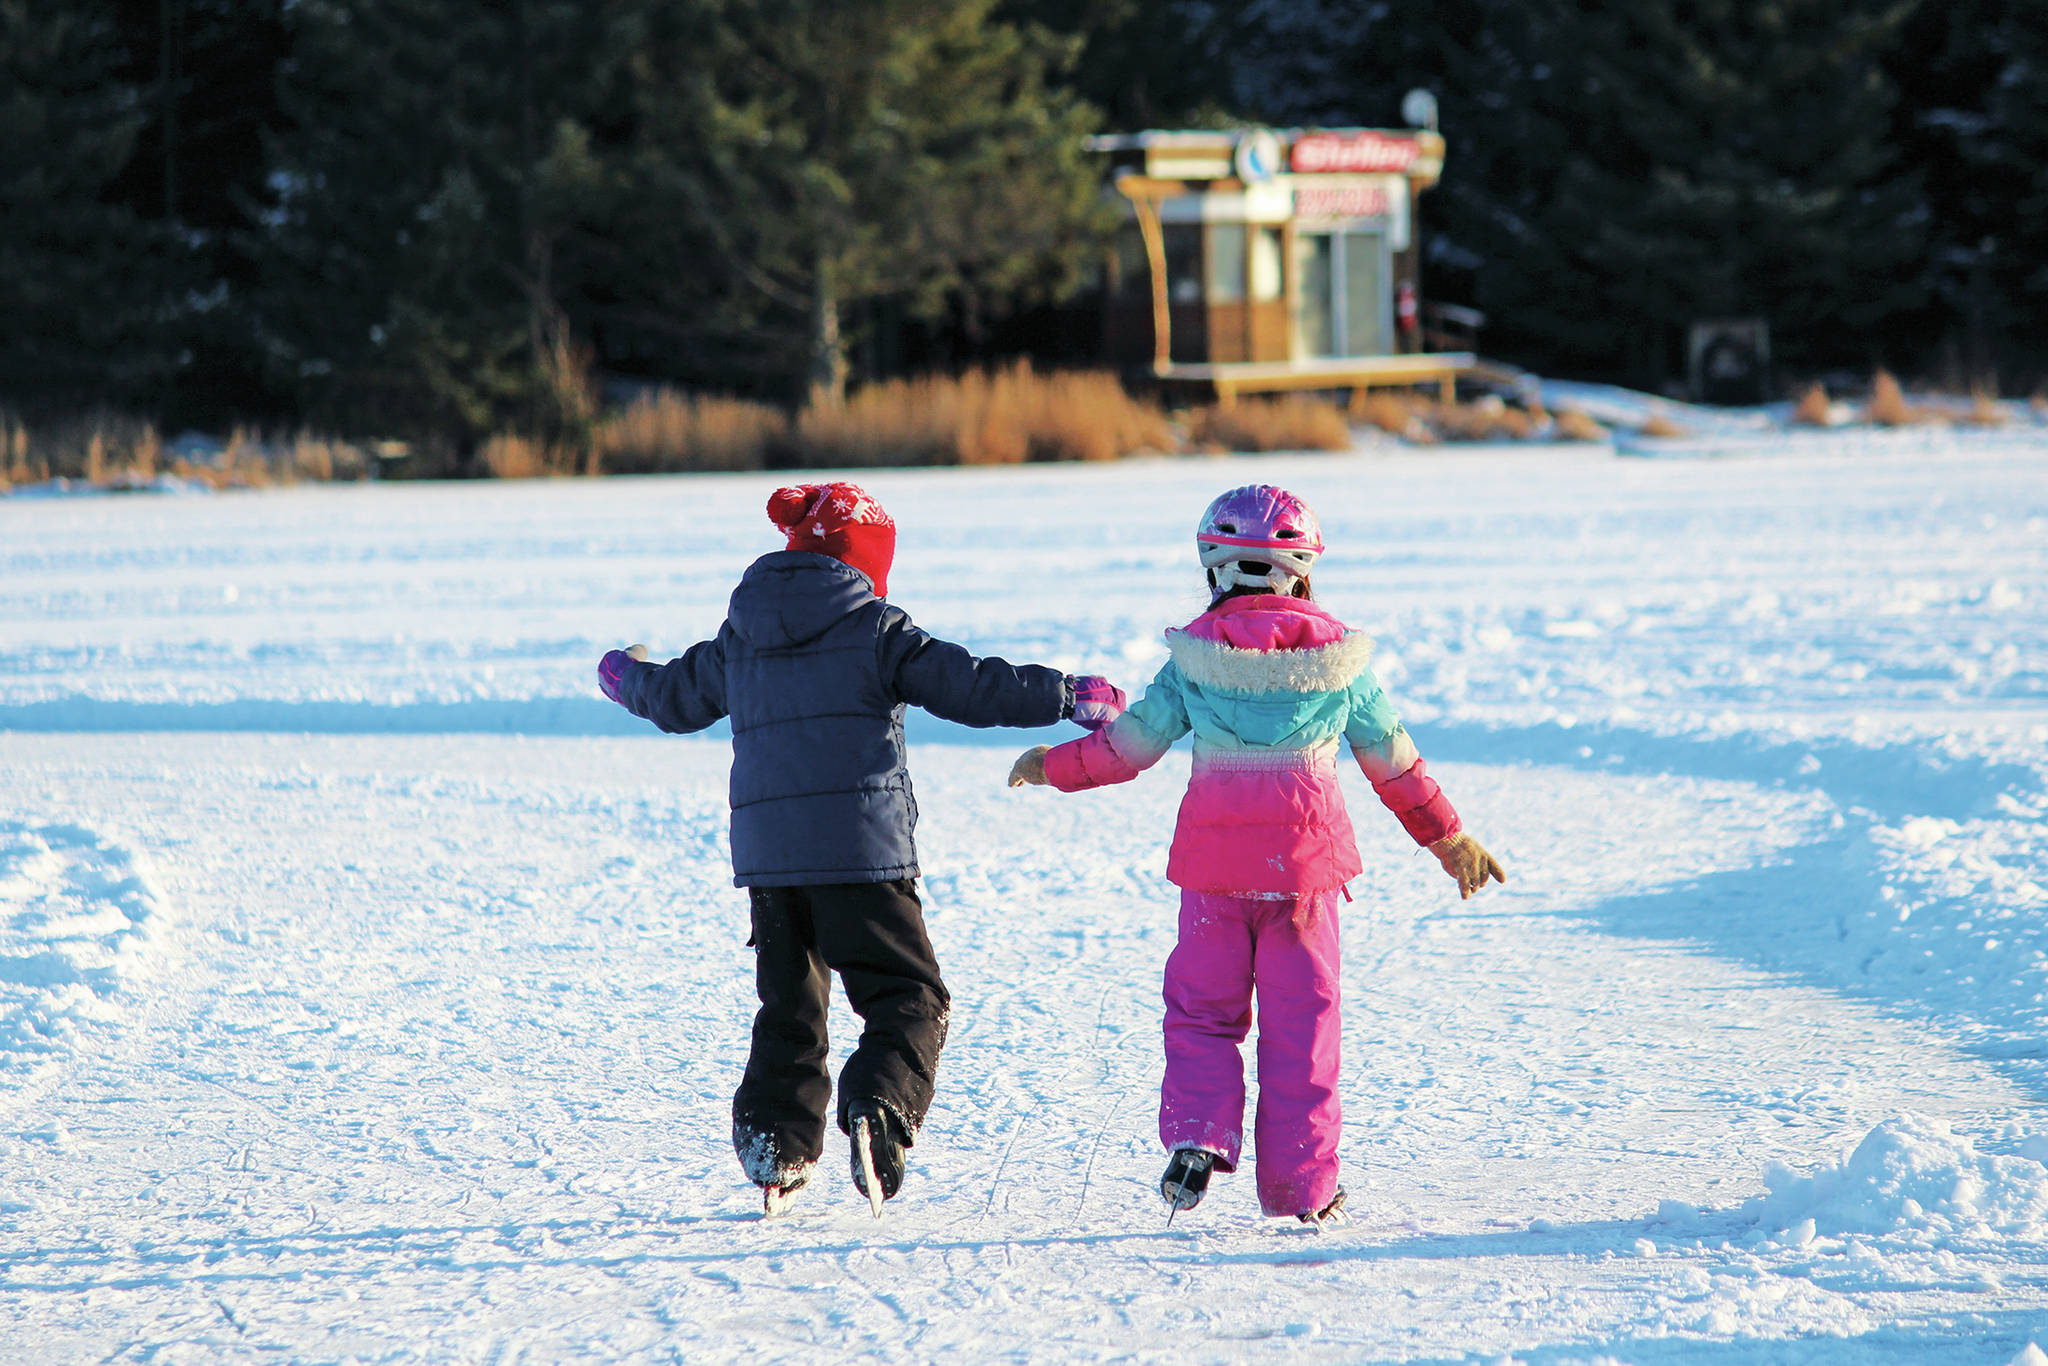 Two children skate around an ice ribbon on Beluga Lake during the Skate the Lake event Saturday, Feb. 6, 2021 in Homer, Alaska. The Homer Hockey Association, which hosted the event, plowed a large skating area as well as several skating ribbons and paths along the lake. (Photo by Megan Pacer/Homer News)